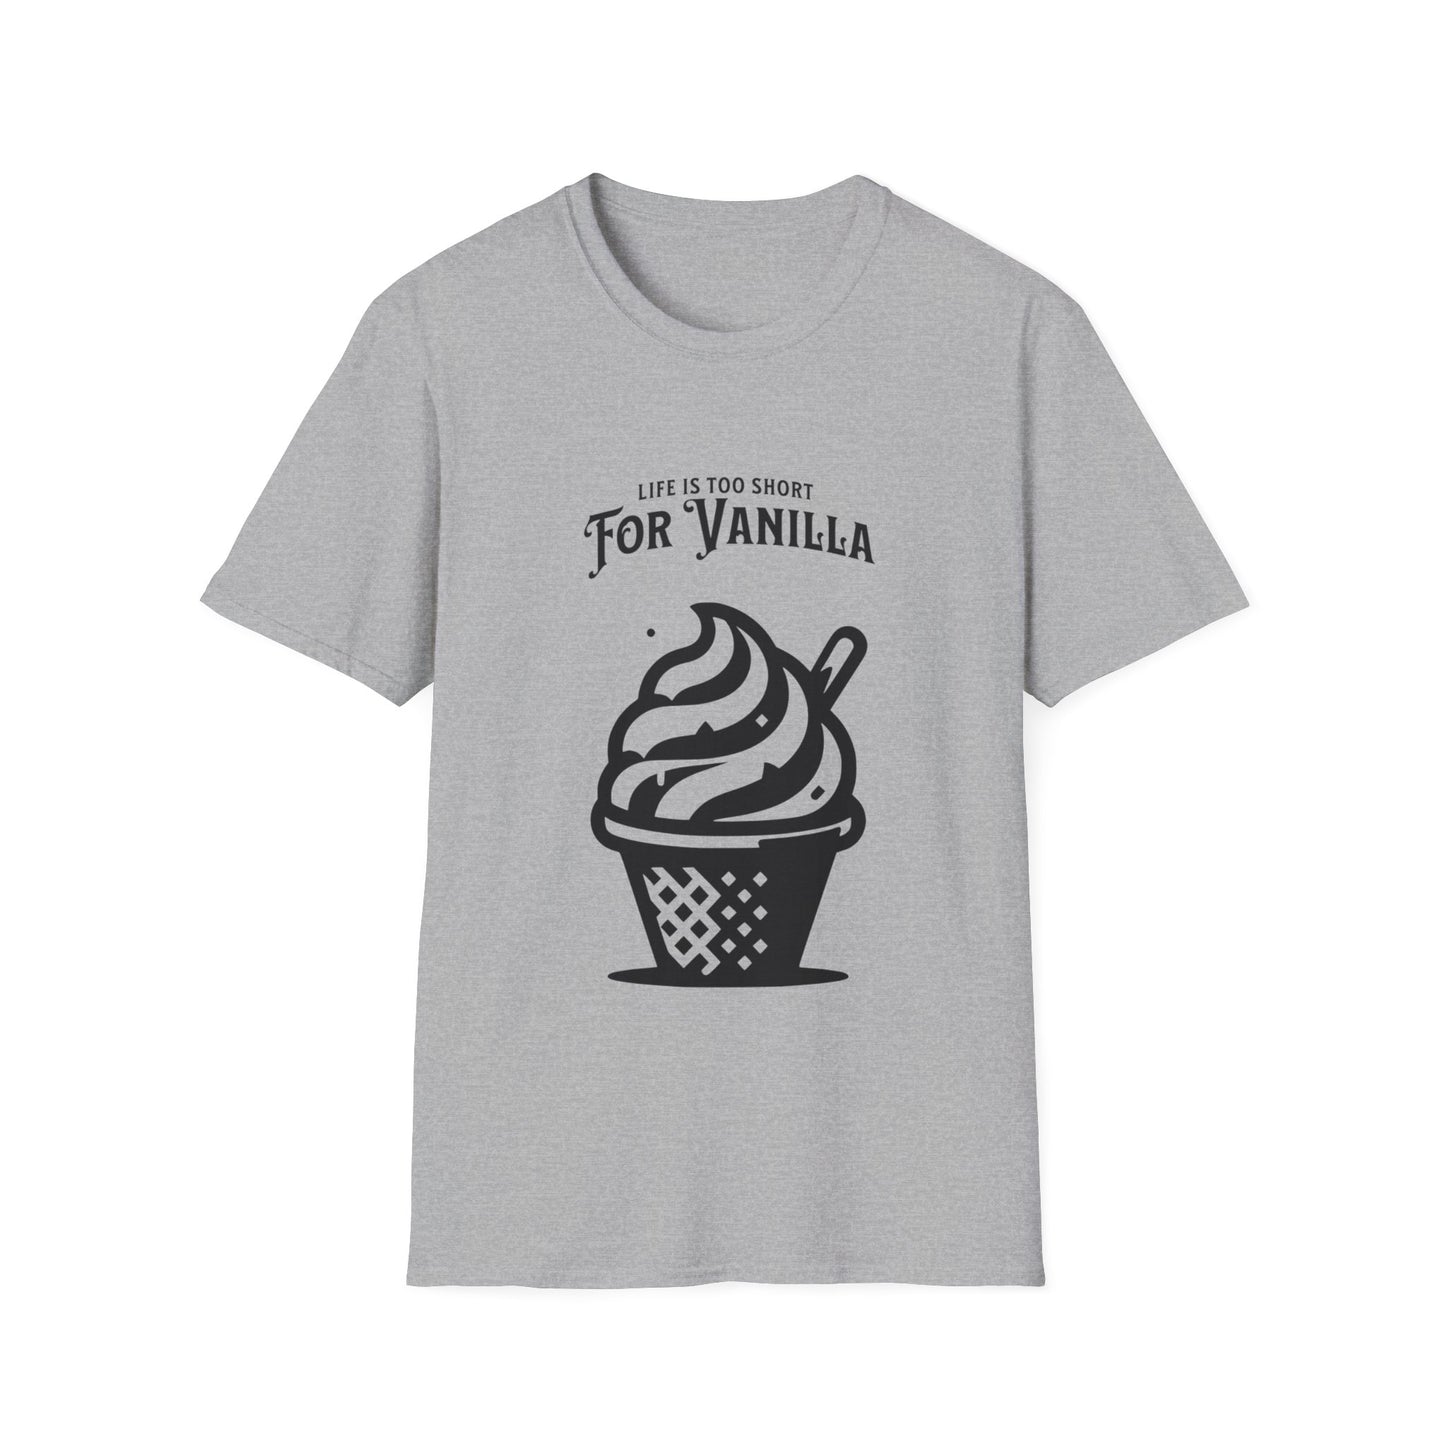 Life is Too Short for Vanilla T-Shirt - Funny Tee - Not Vanilla Kink Unisex Softstyle T-Shirt